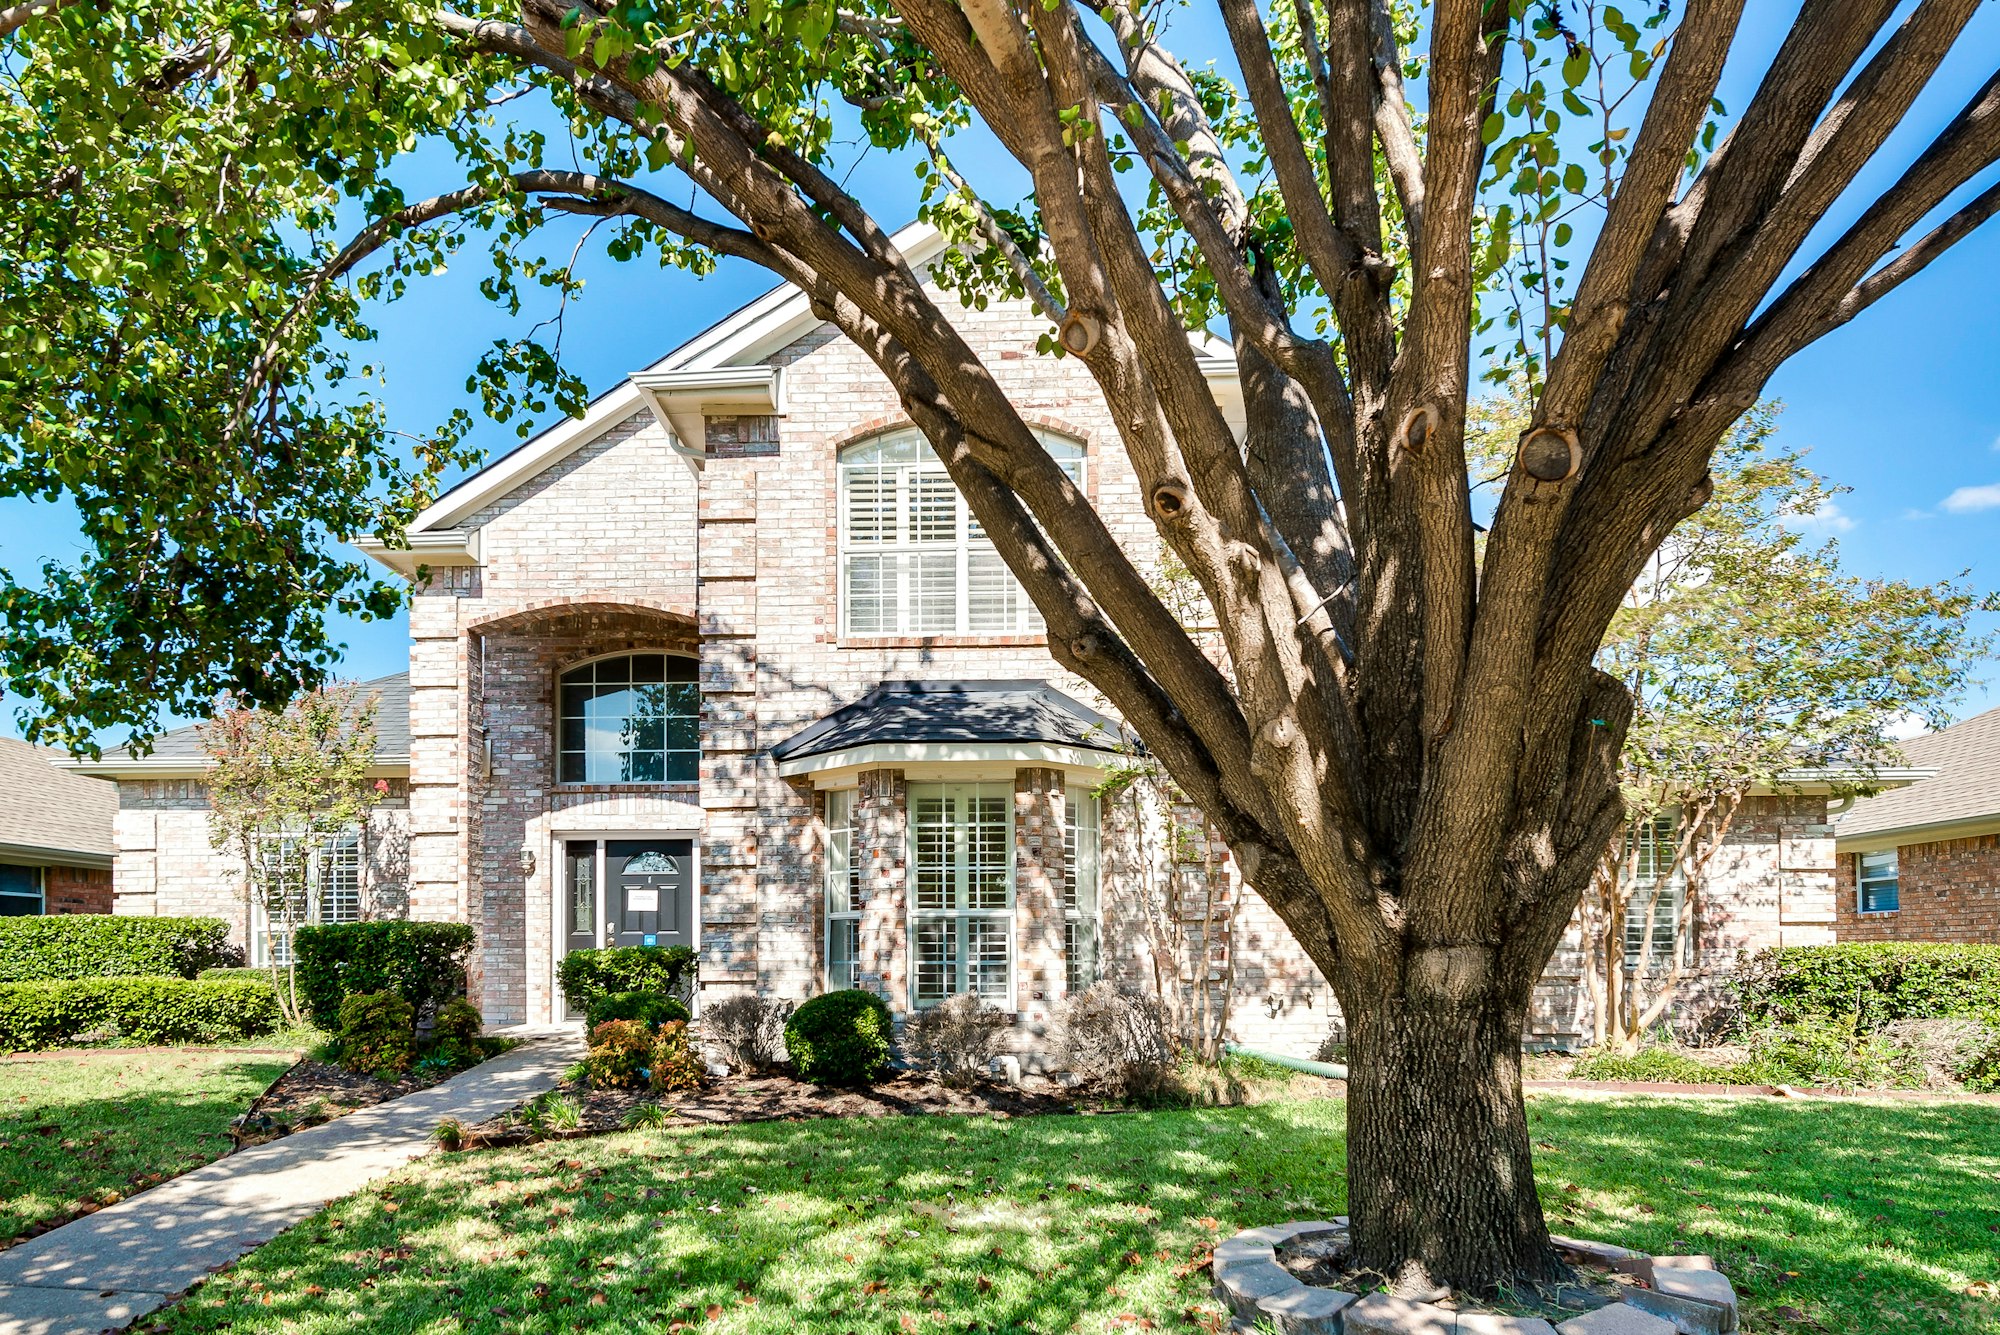 Photo 1 of 30 - 1726 Creek Valley Rd, Mesquite, TX 75181